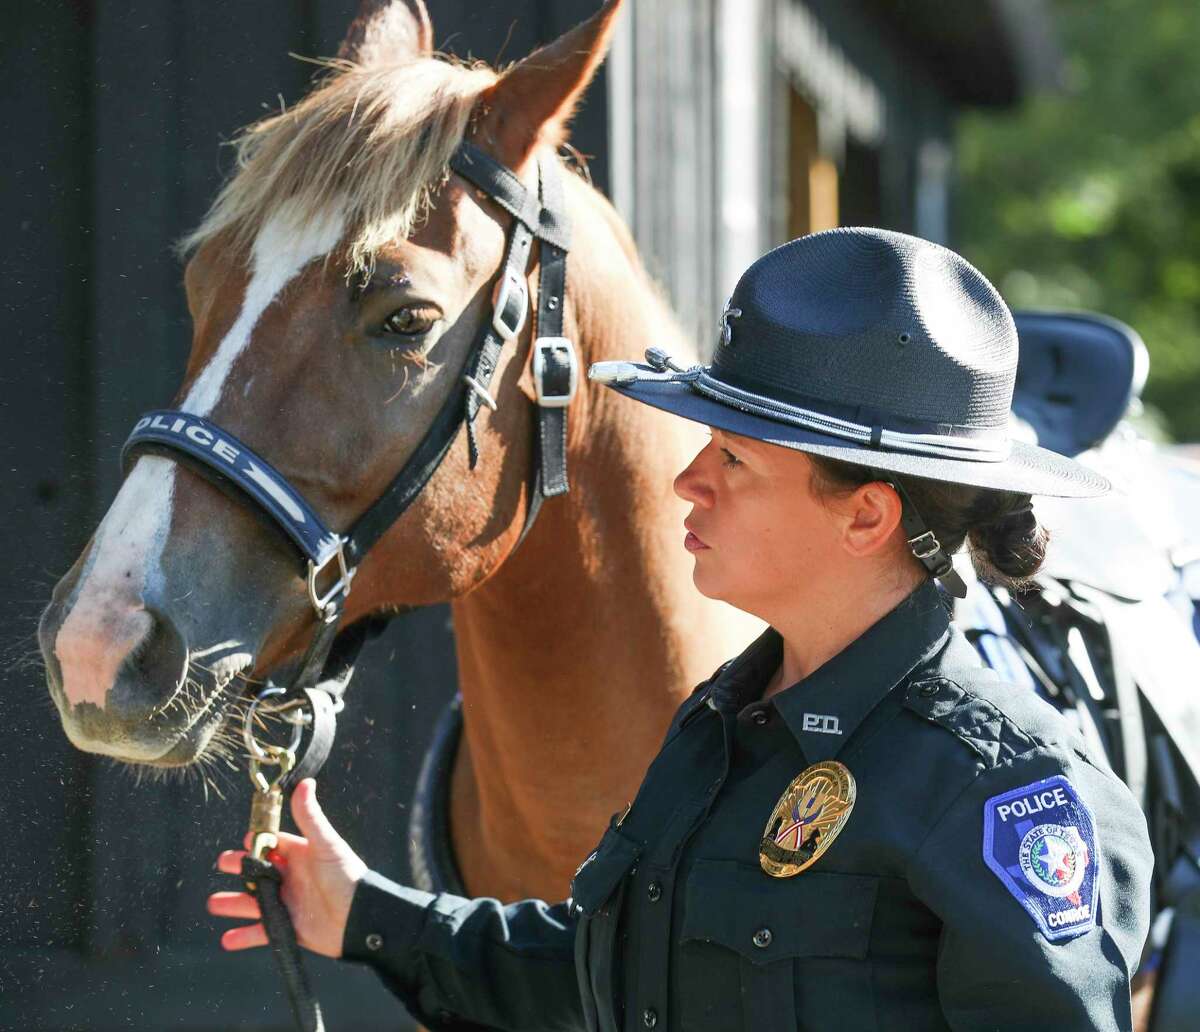 Conroe Police Officer Shana House prepares her horse to go out on patrol as part of the department’s newly-formed mounted patrol unit go out for the day, Tuesday, Sept. 27, 2022, in Conroe. The unit, with five full-time officers, provides horse-back police patrols in both neighborhoods, residential, and business areas in Conroe.